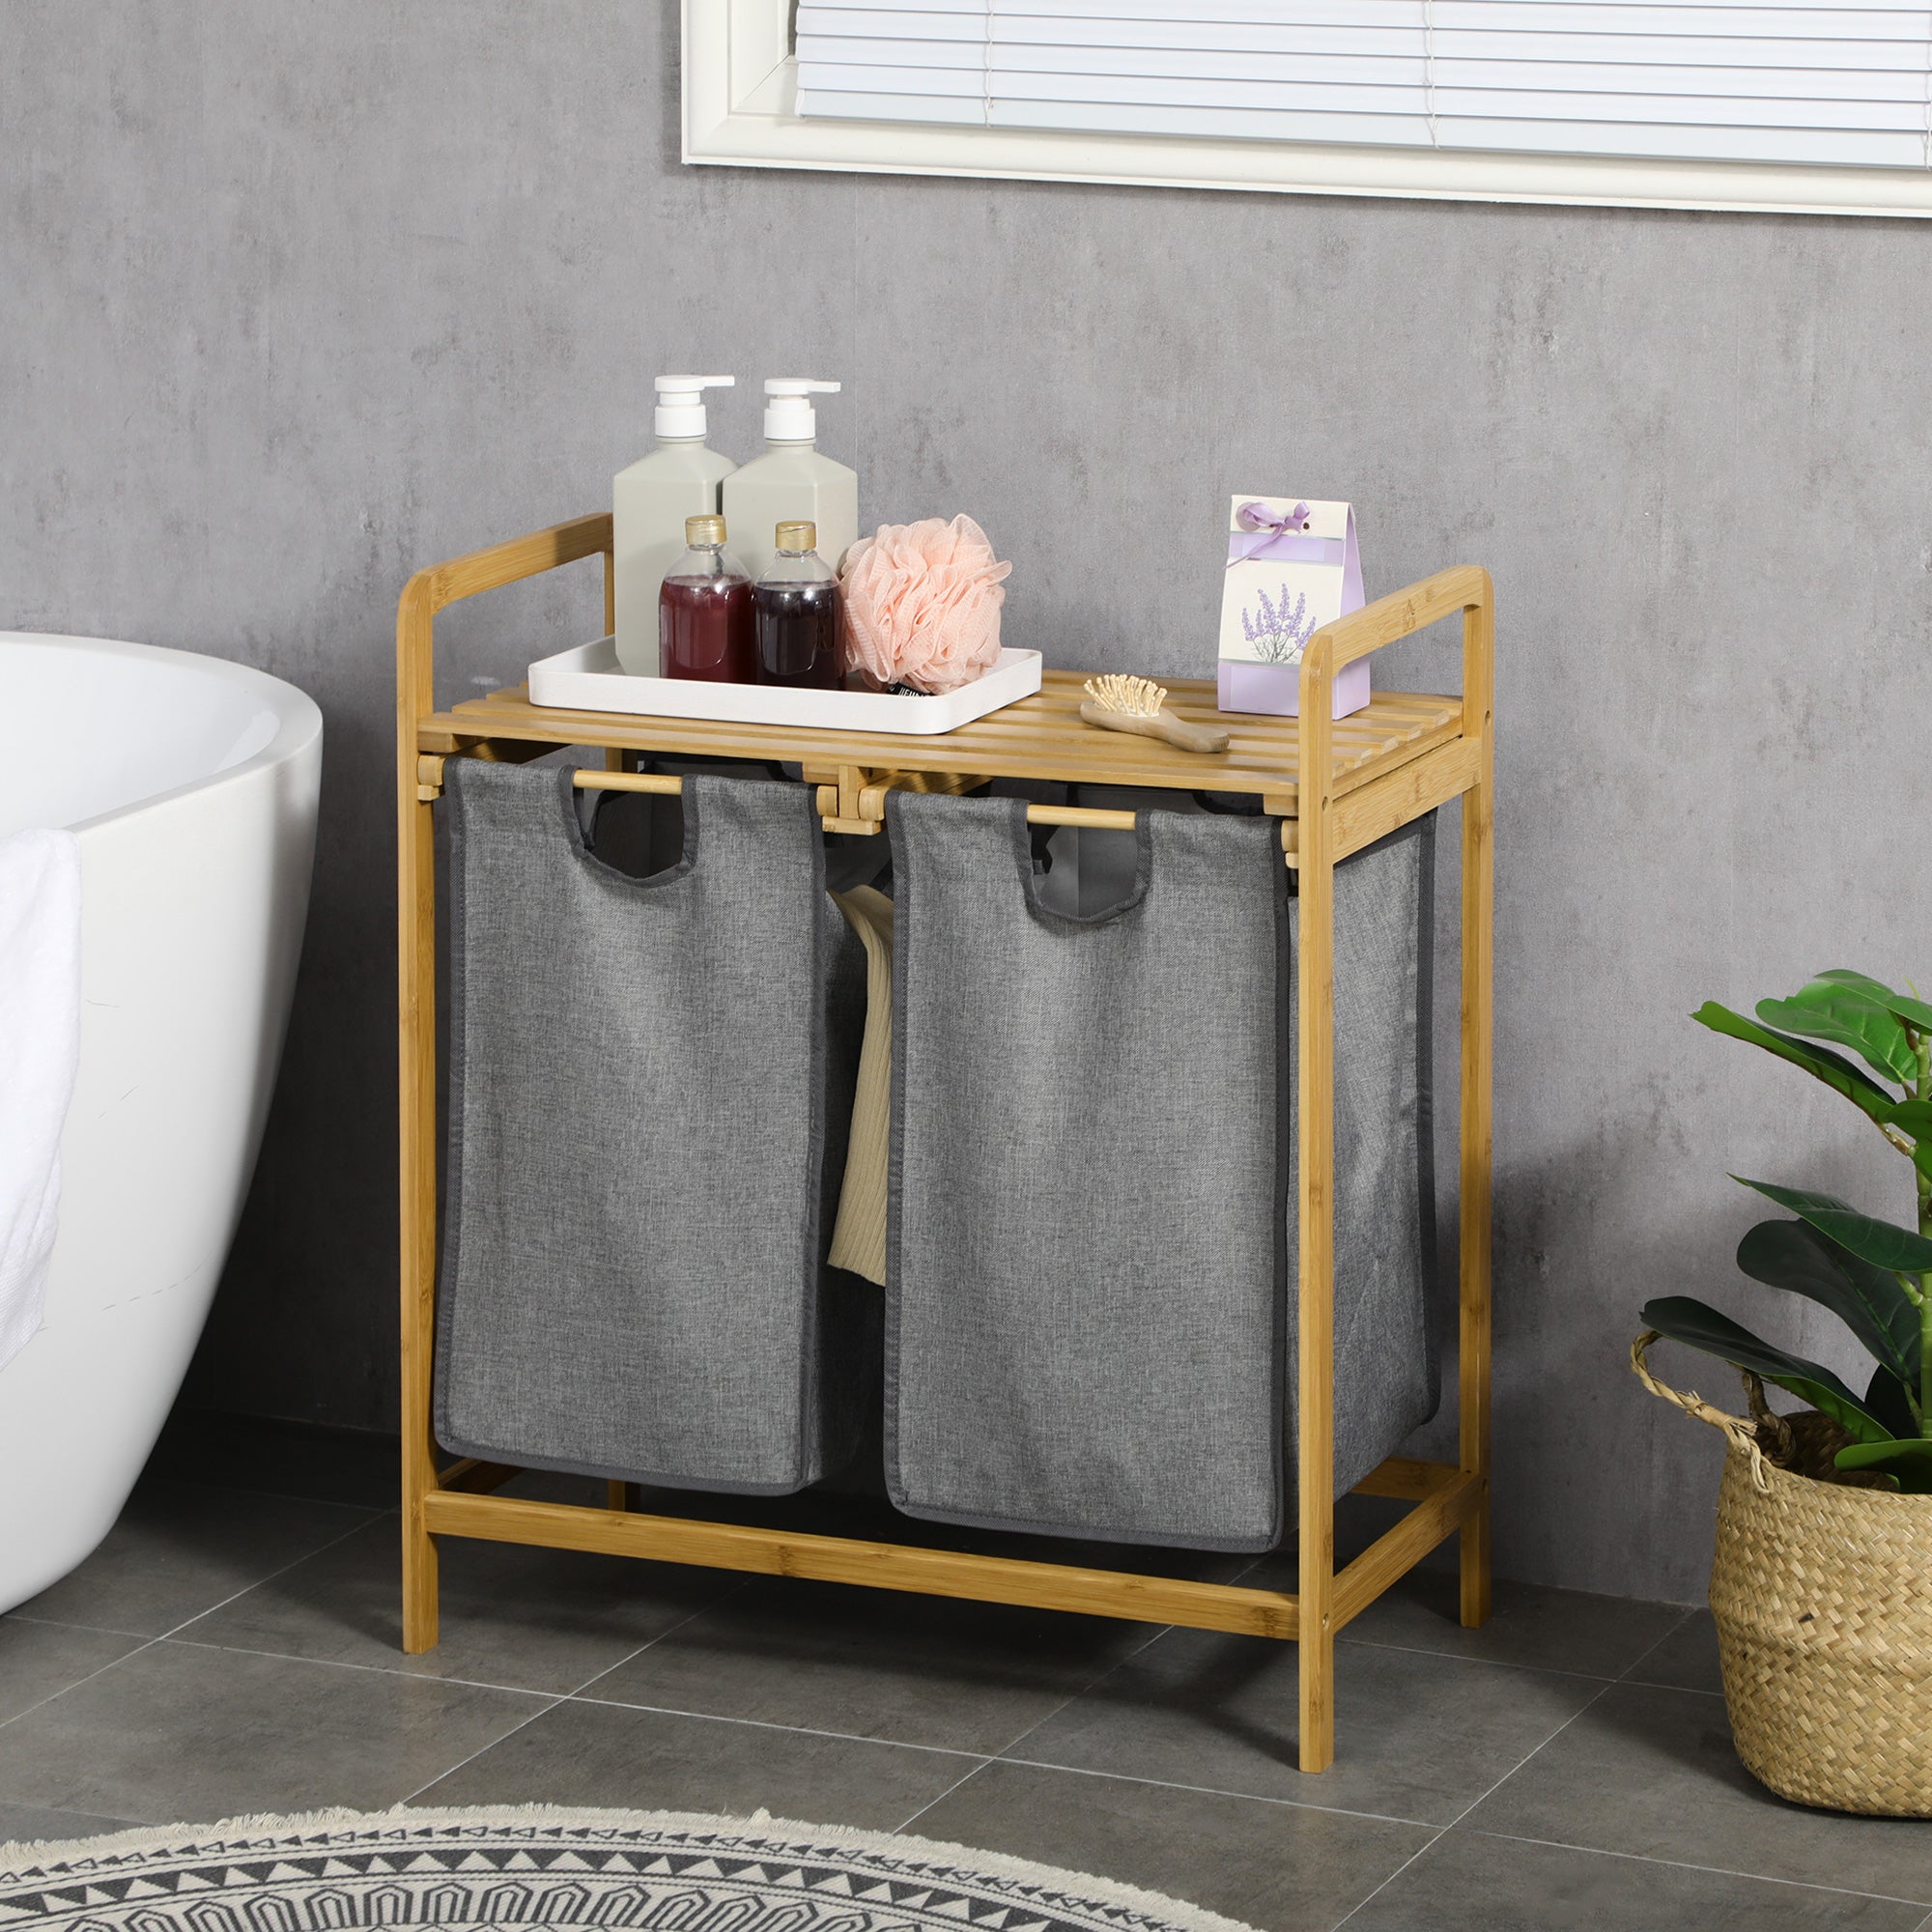 HOMCOM Bamboo Laundry Basket, Laundry Hamper with Shelf, Pull-out Bags for Bedroom, Bathroom, Laundry Room, 64 x 33 x 73 cm, Grey